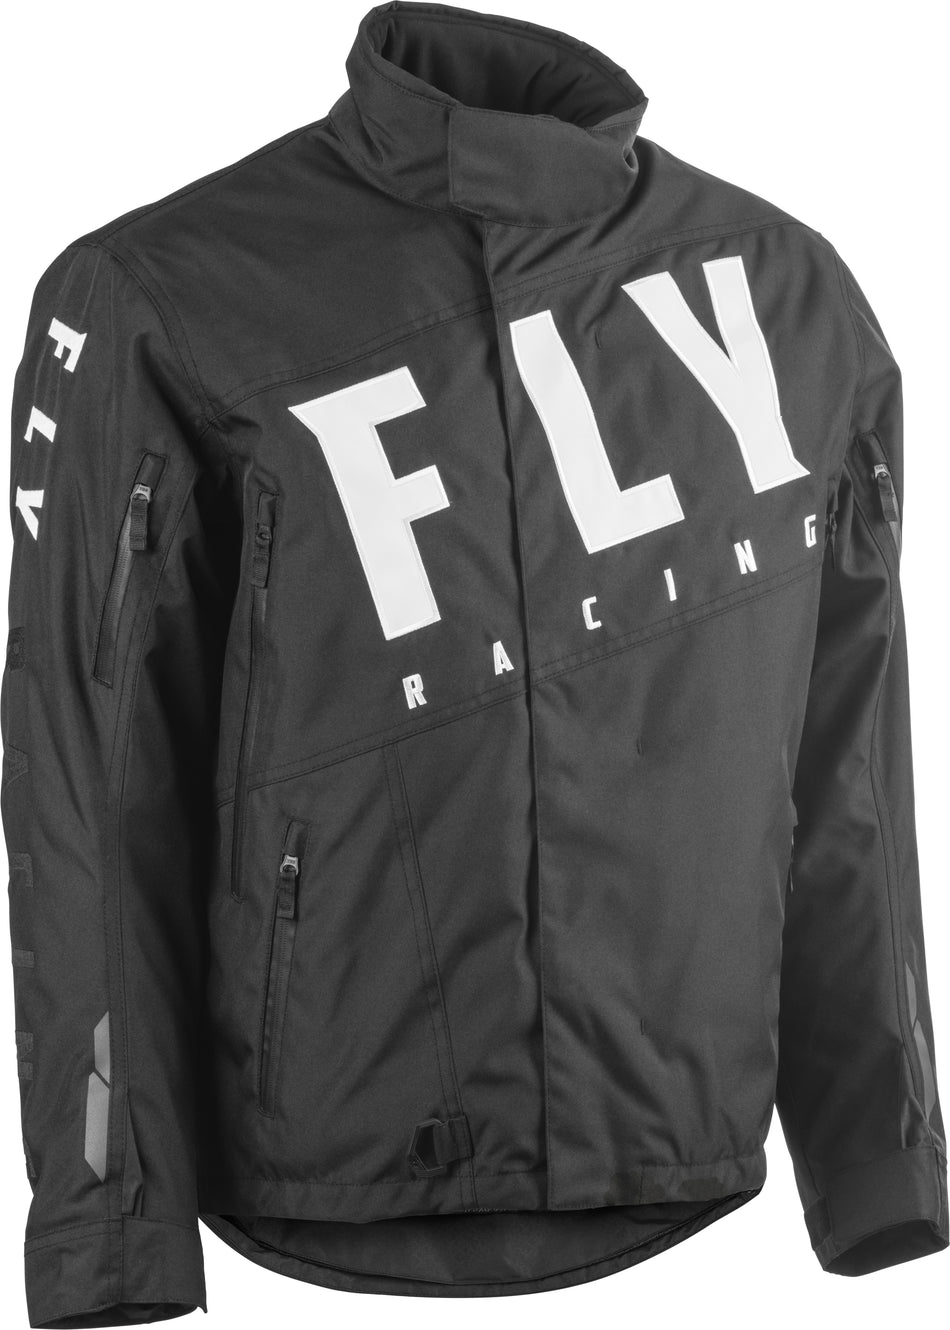 FLY RACING Fly Snx Pro Jacket Black Md 470-4110M